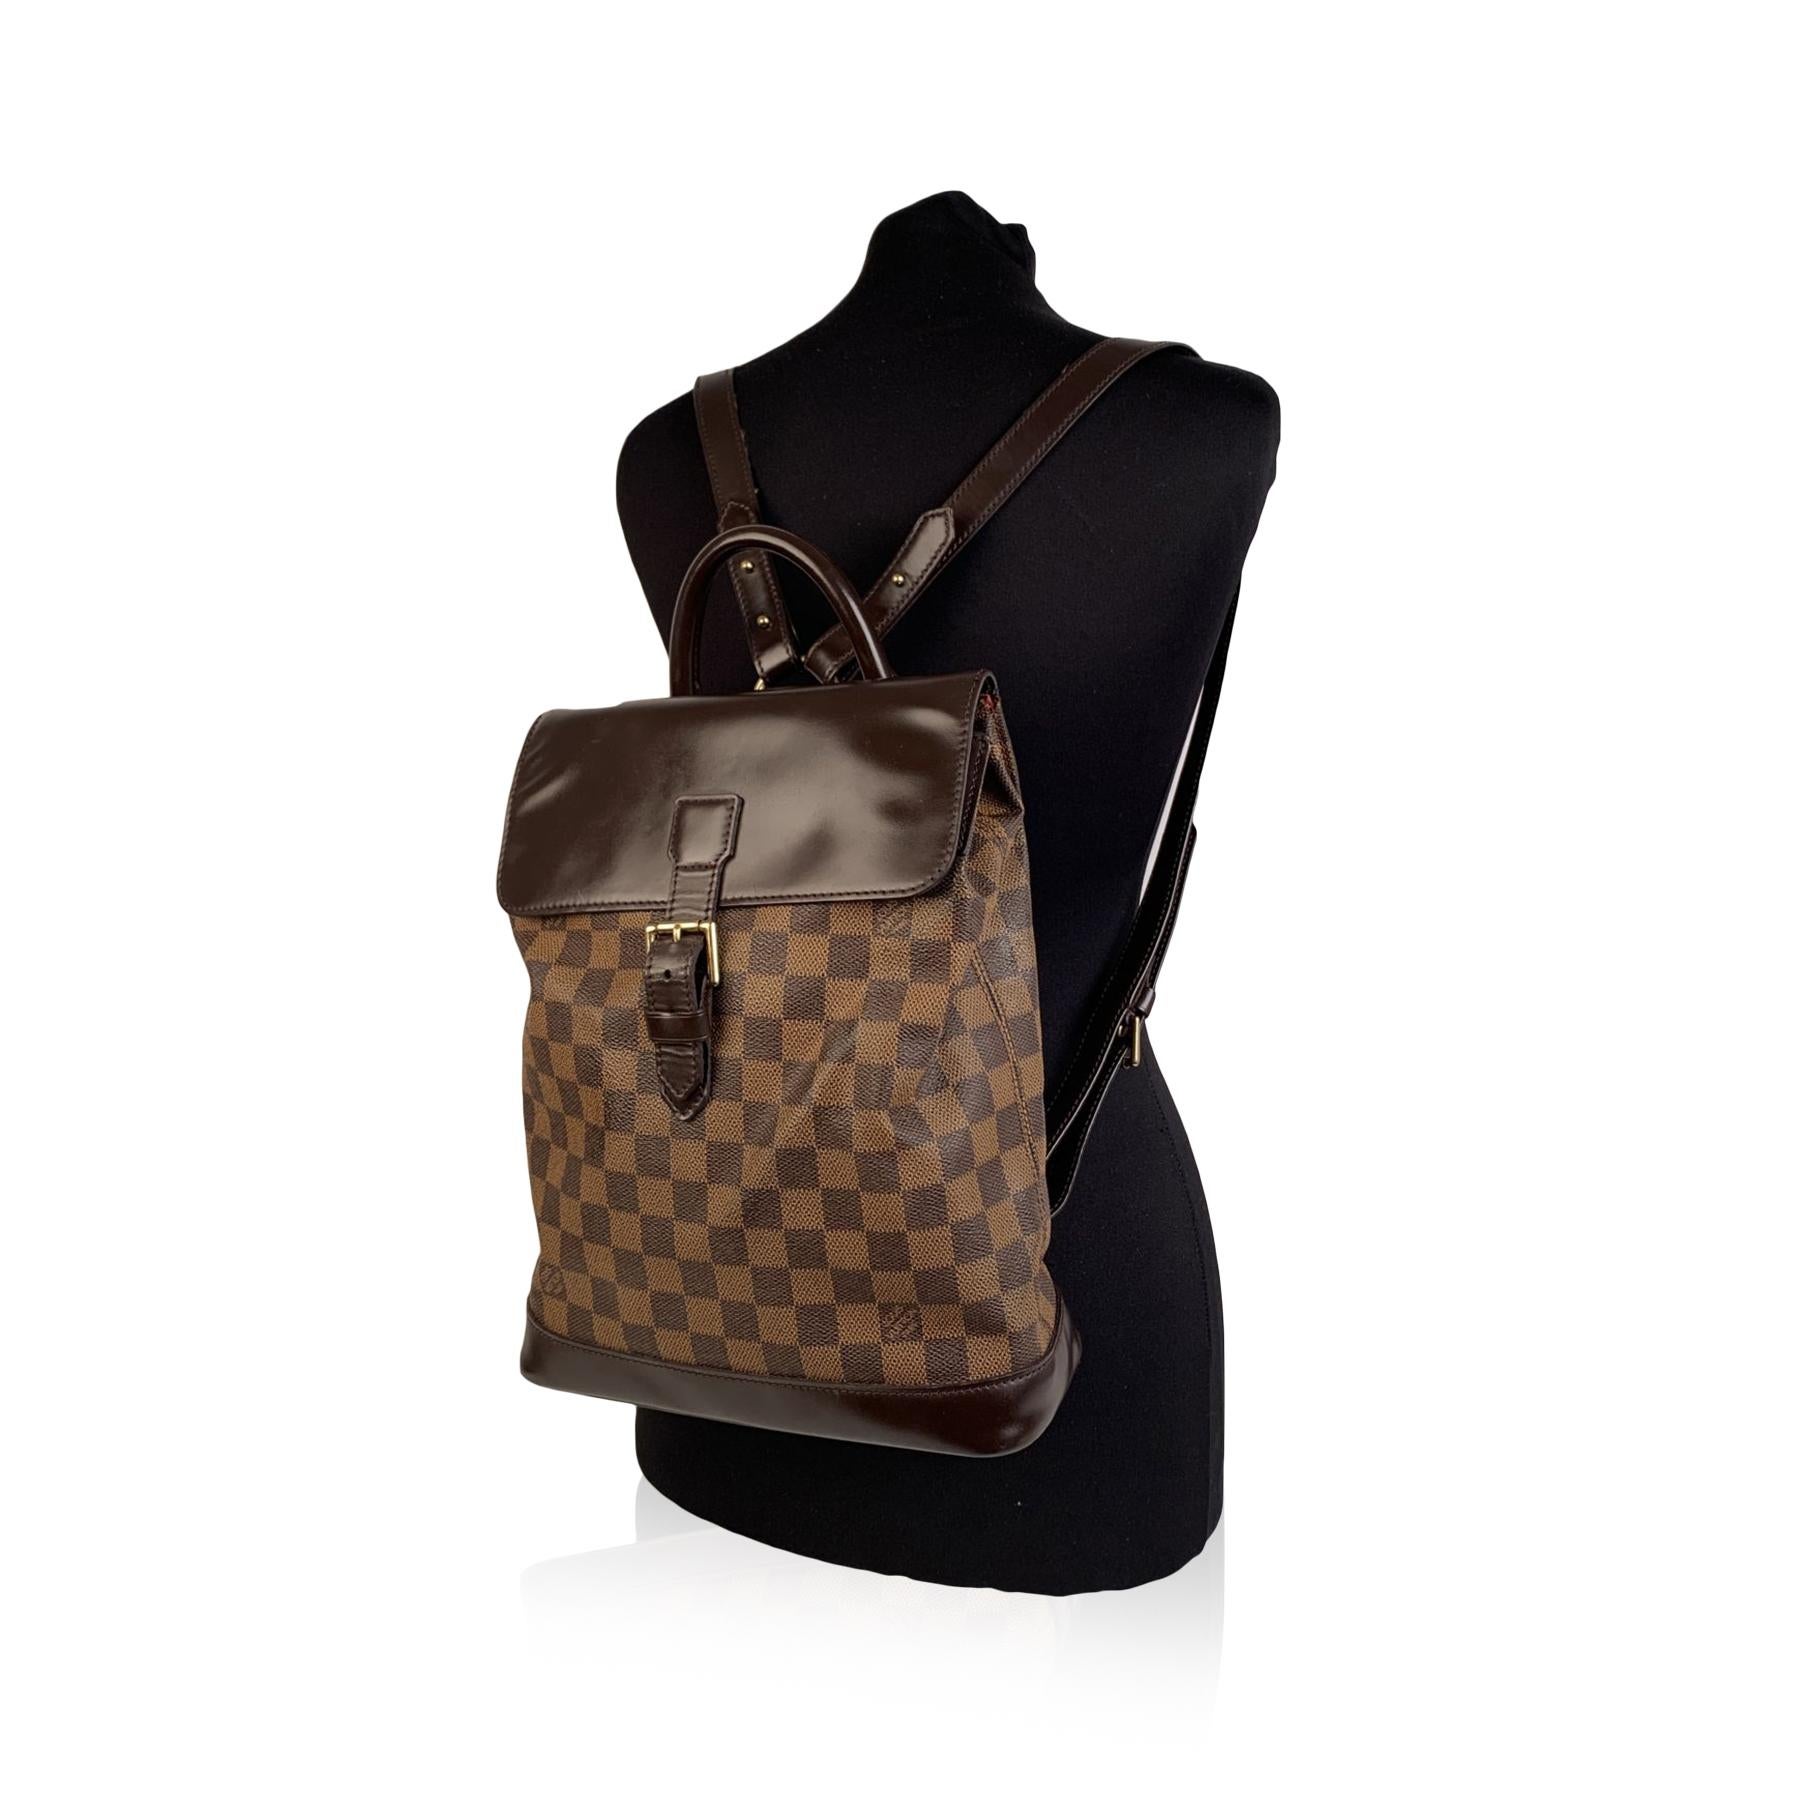 This beautiful Bag will come with a Certificate of Authenticity provided by Entrupy, leading International Fashion Authenticators. The certificate will be provided at no further cost.

Louis Vuitton brown Damier Ebene canvas 'Soho' backpack. Crafted